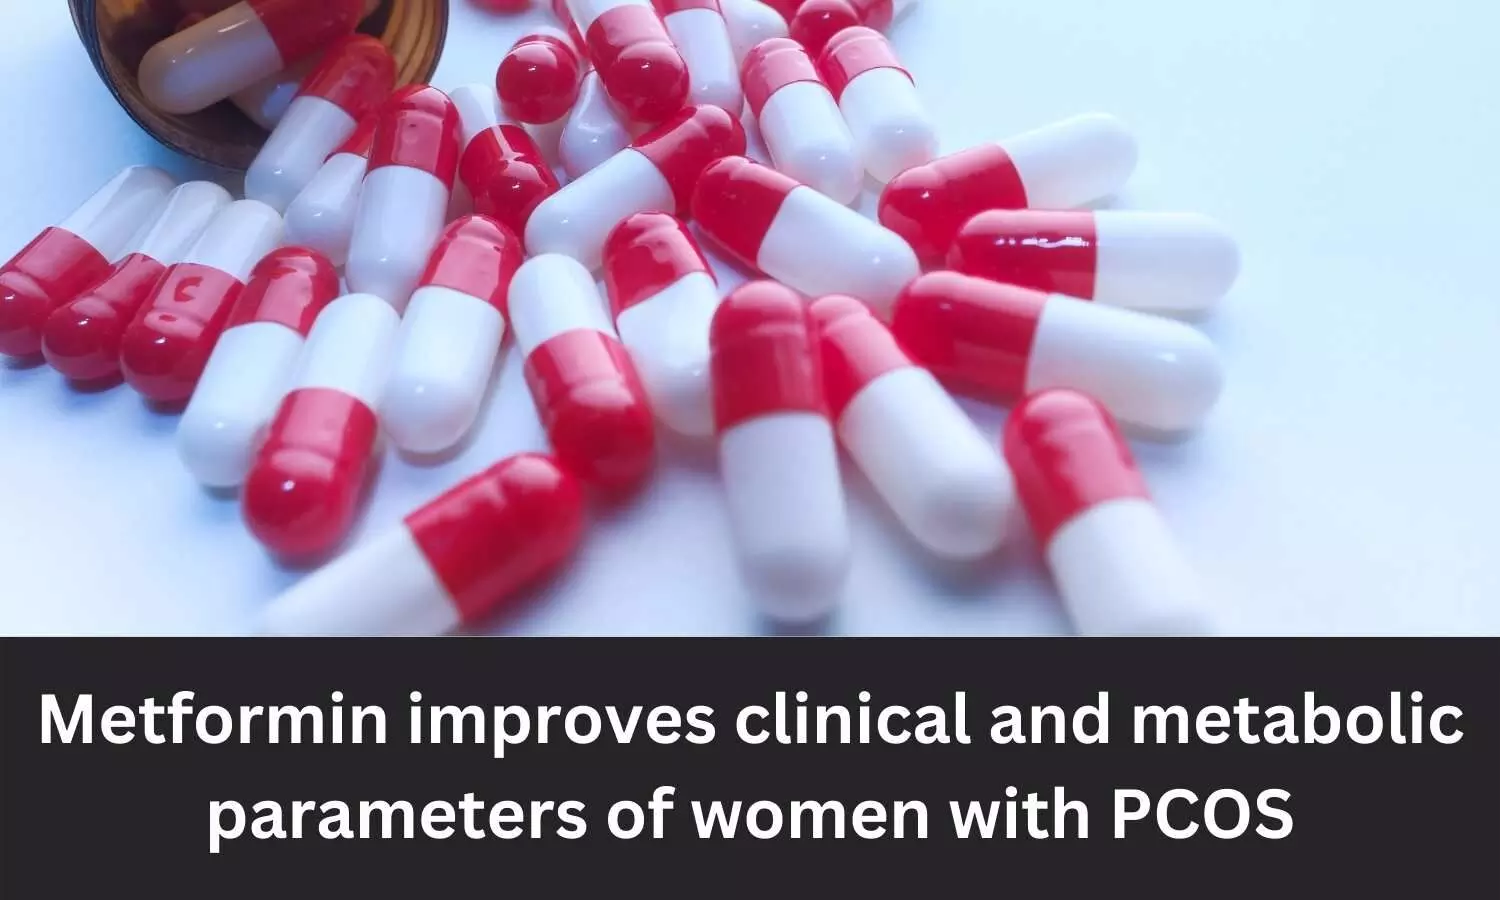 Metformin improves clinical, metabolic parameters of women with PCOS